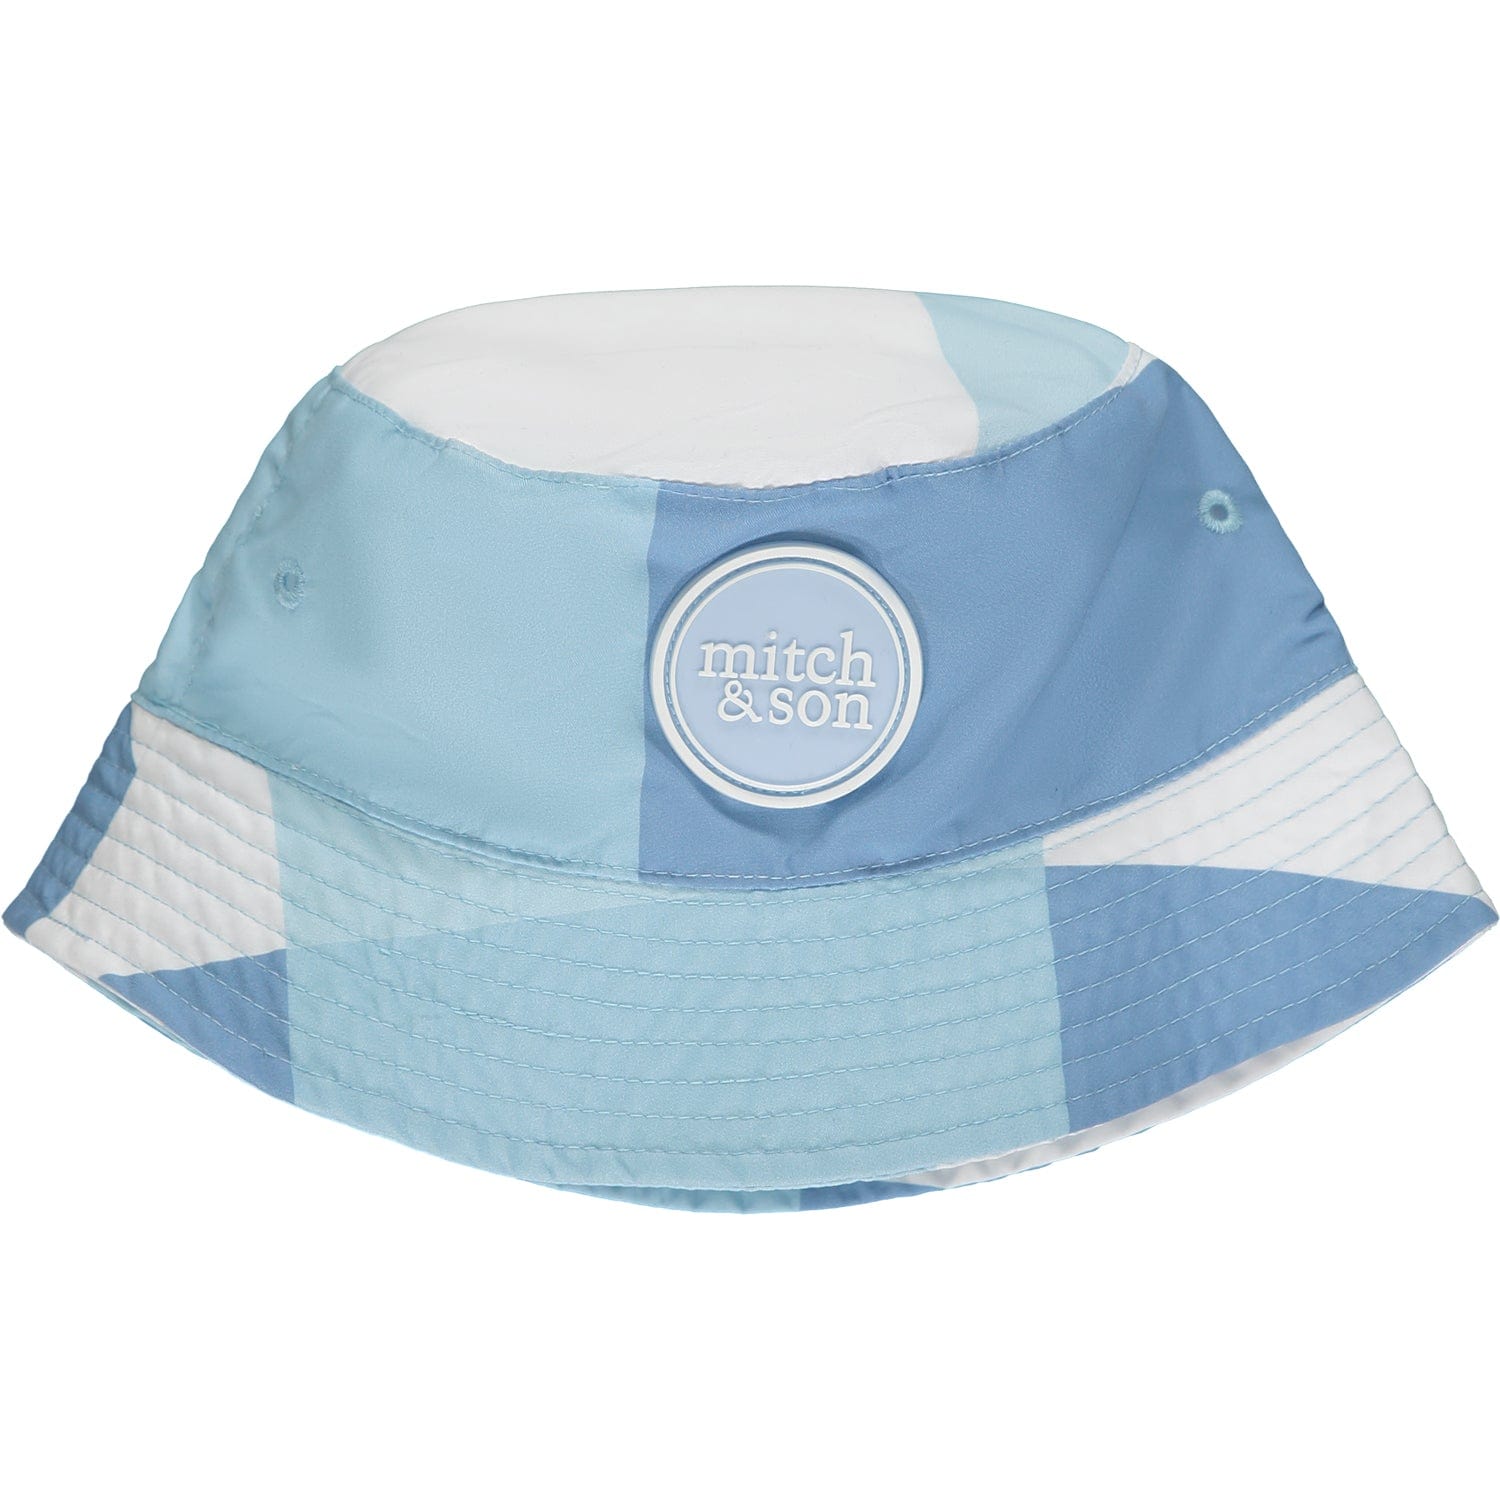 MITCH & SON - James A Time To Fly Square Bucket Hat - Sky Blue